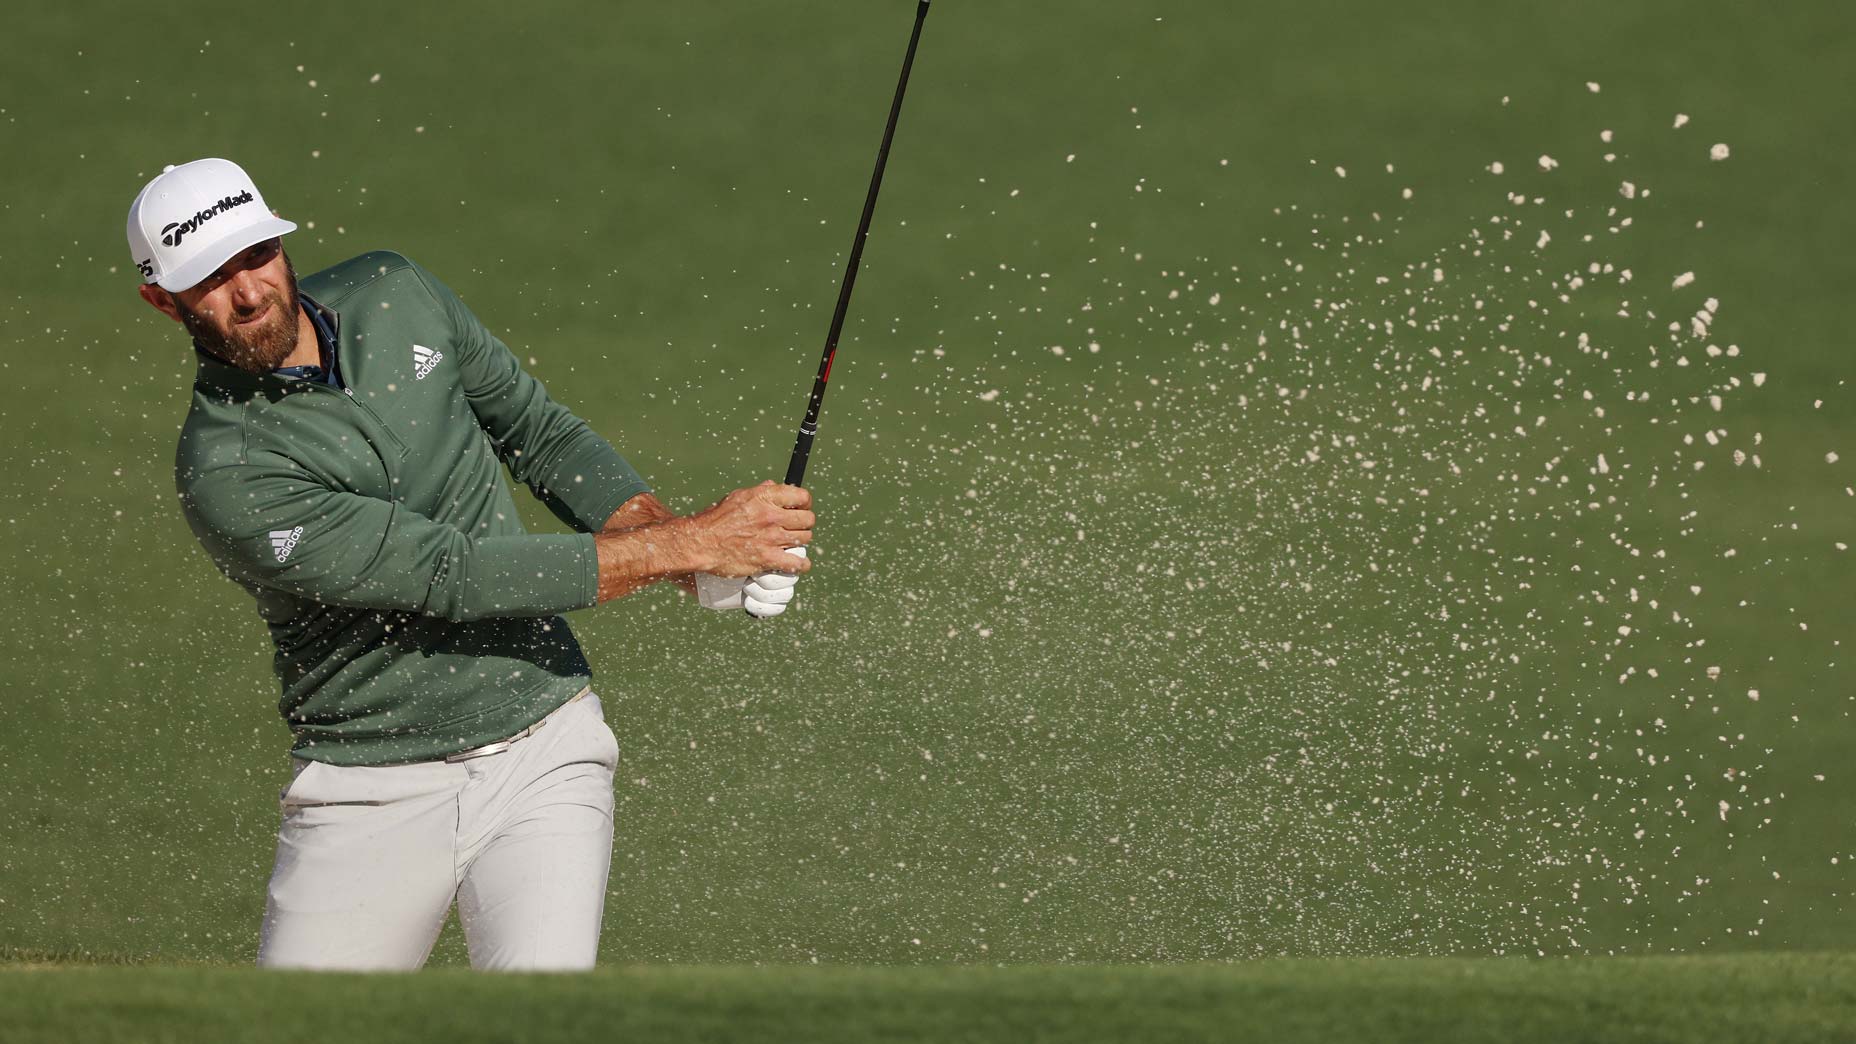 Zach Johnson odds to win the Masters Tournament